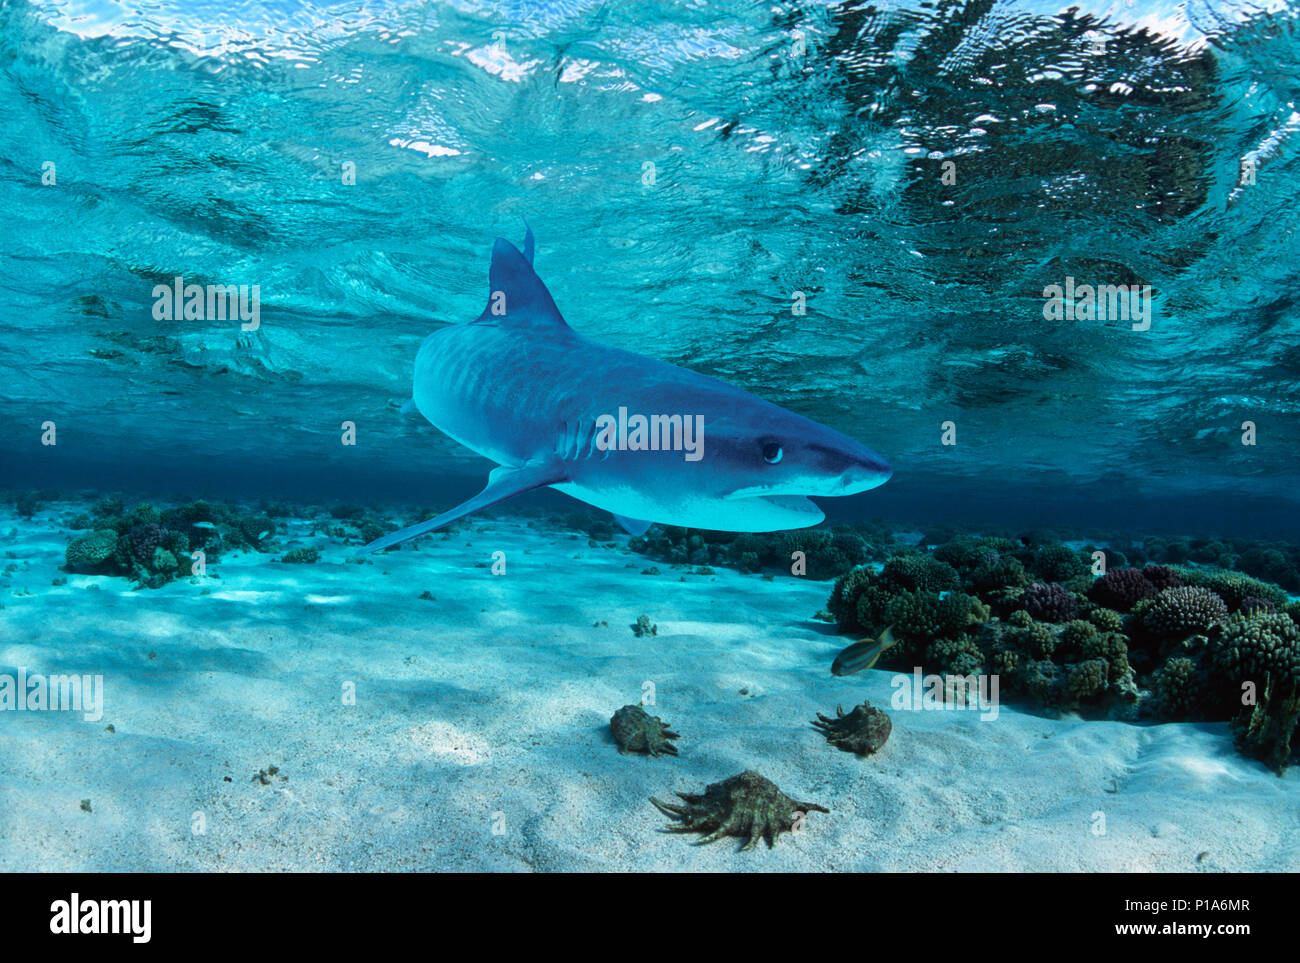 Tiger Shark (Galeocerdo cuvier), Egypt - Red Sea.   Image digitally altered to remove distracting or to add more interesting background. The main subj Stock Photo